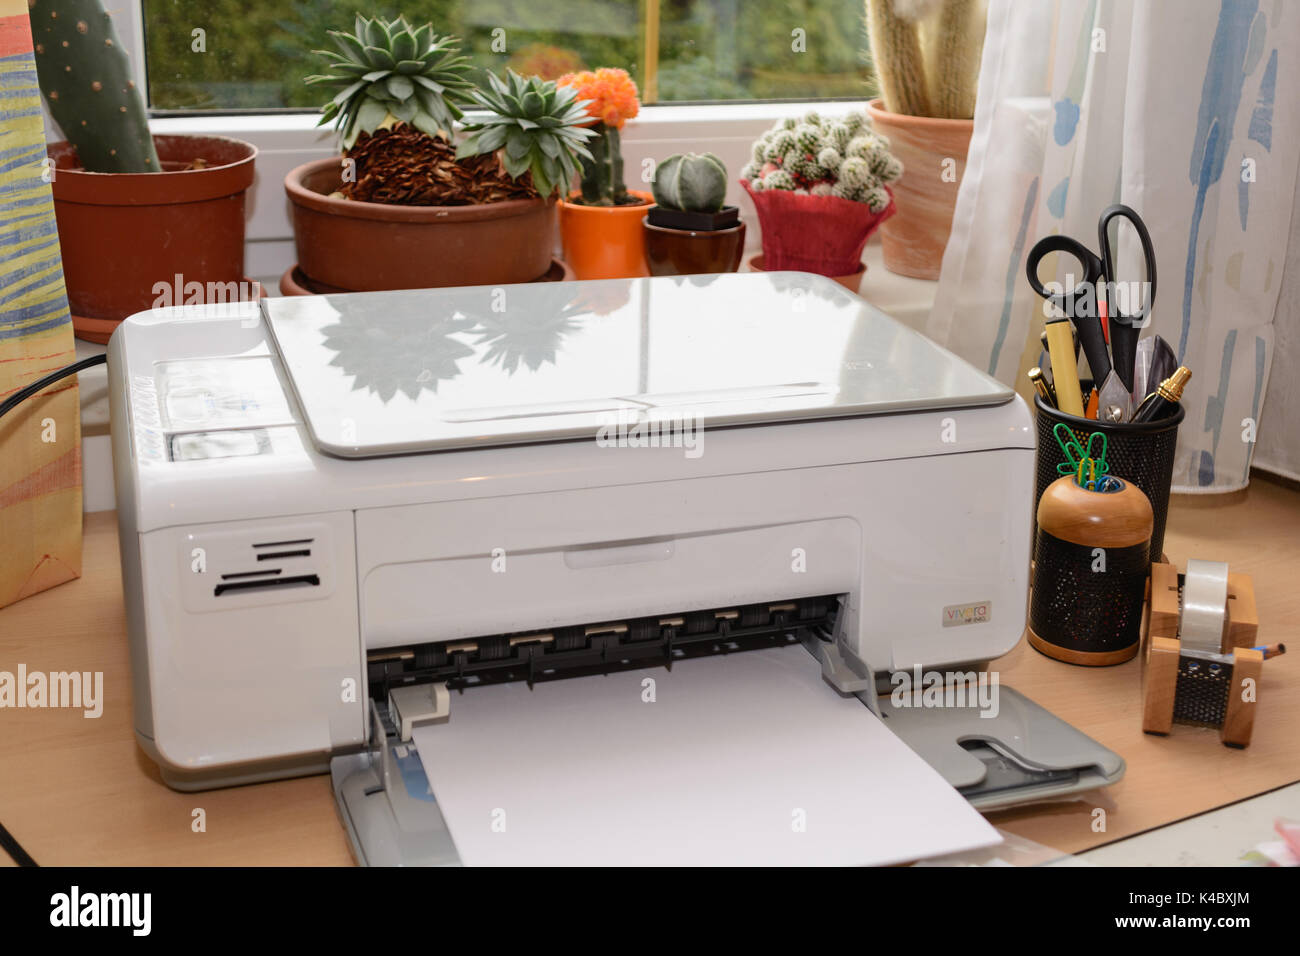 Inkjet Printers And Other Accessories Are At The Desk In An Office Stock Photo